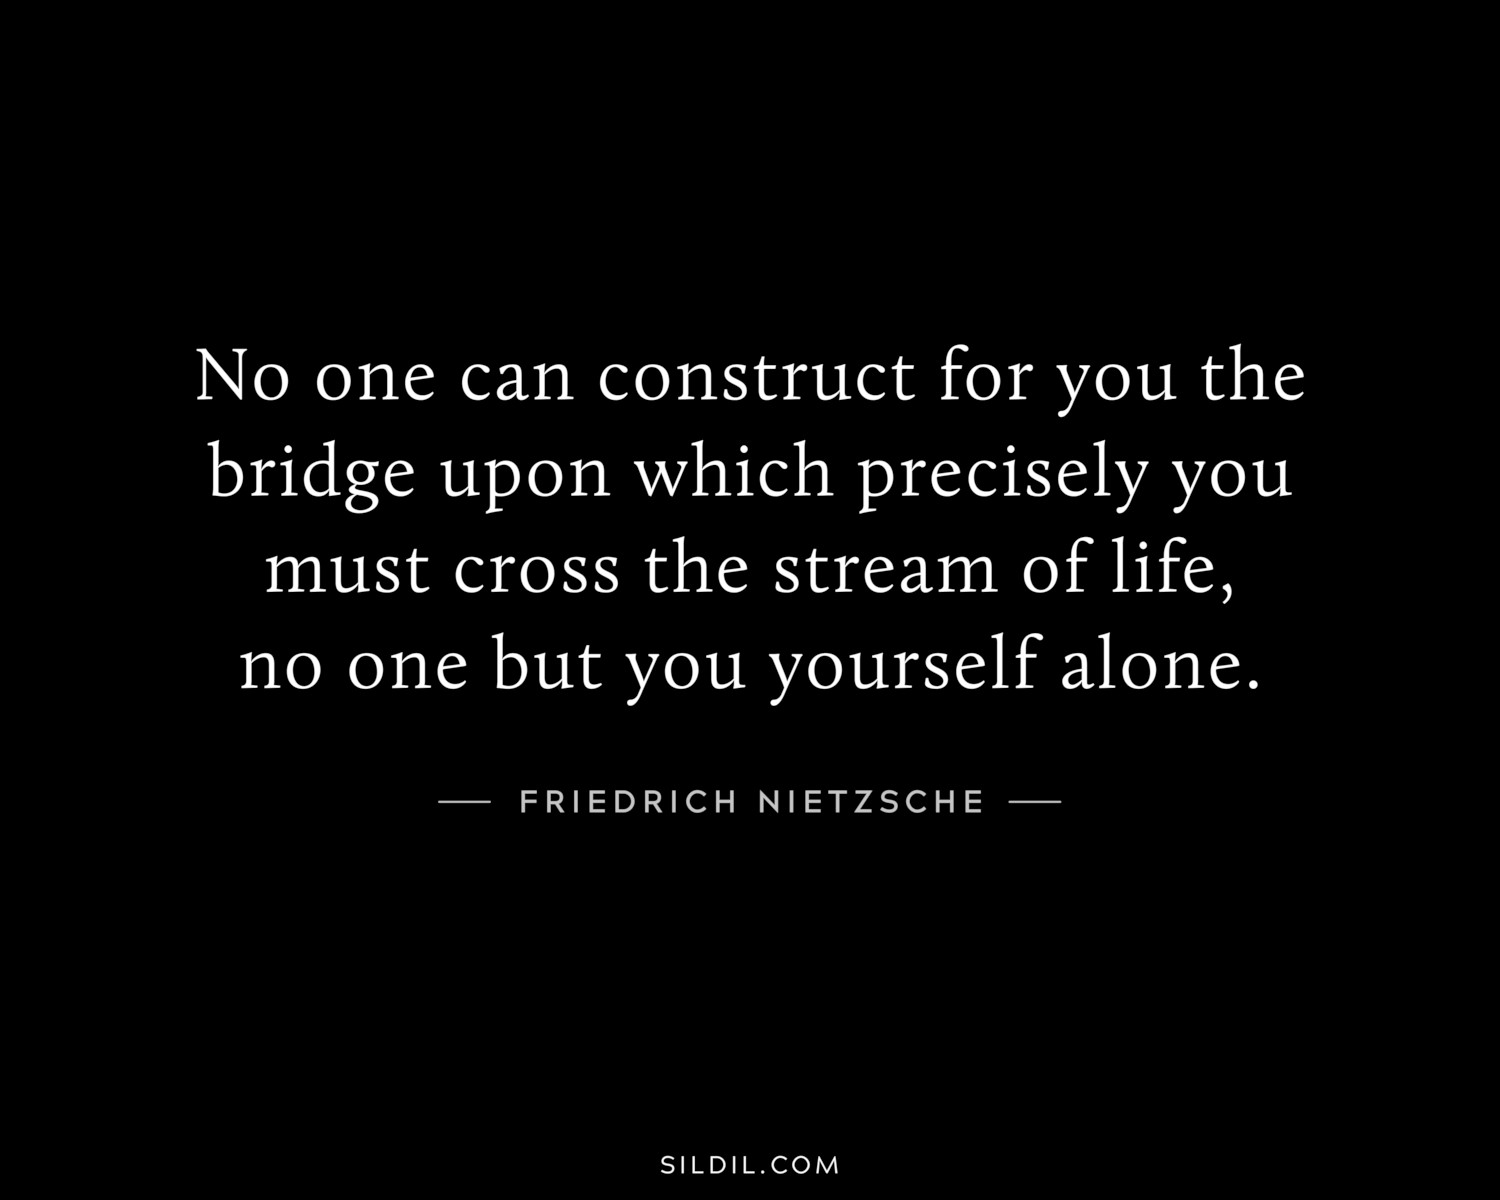 No one can construct for you the bridge upon which precisely you must cross the stream of life, no one but you yourself alone.